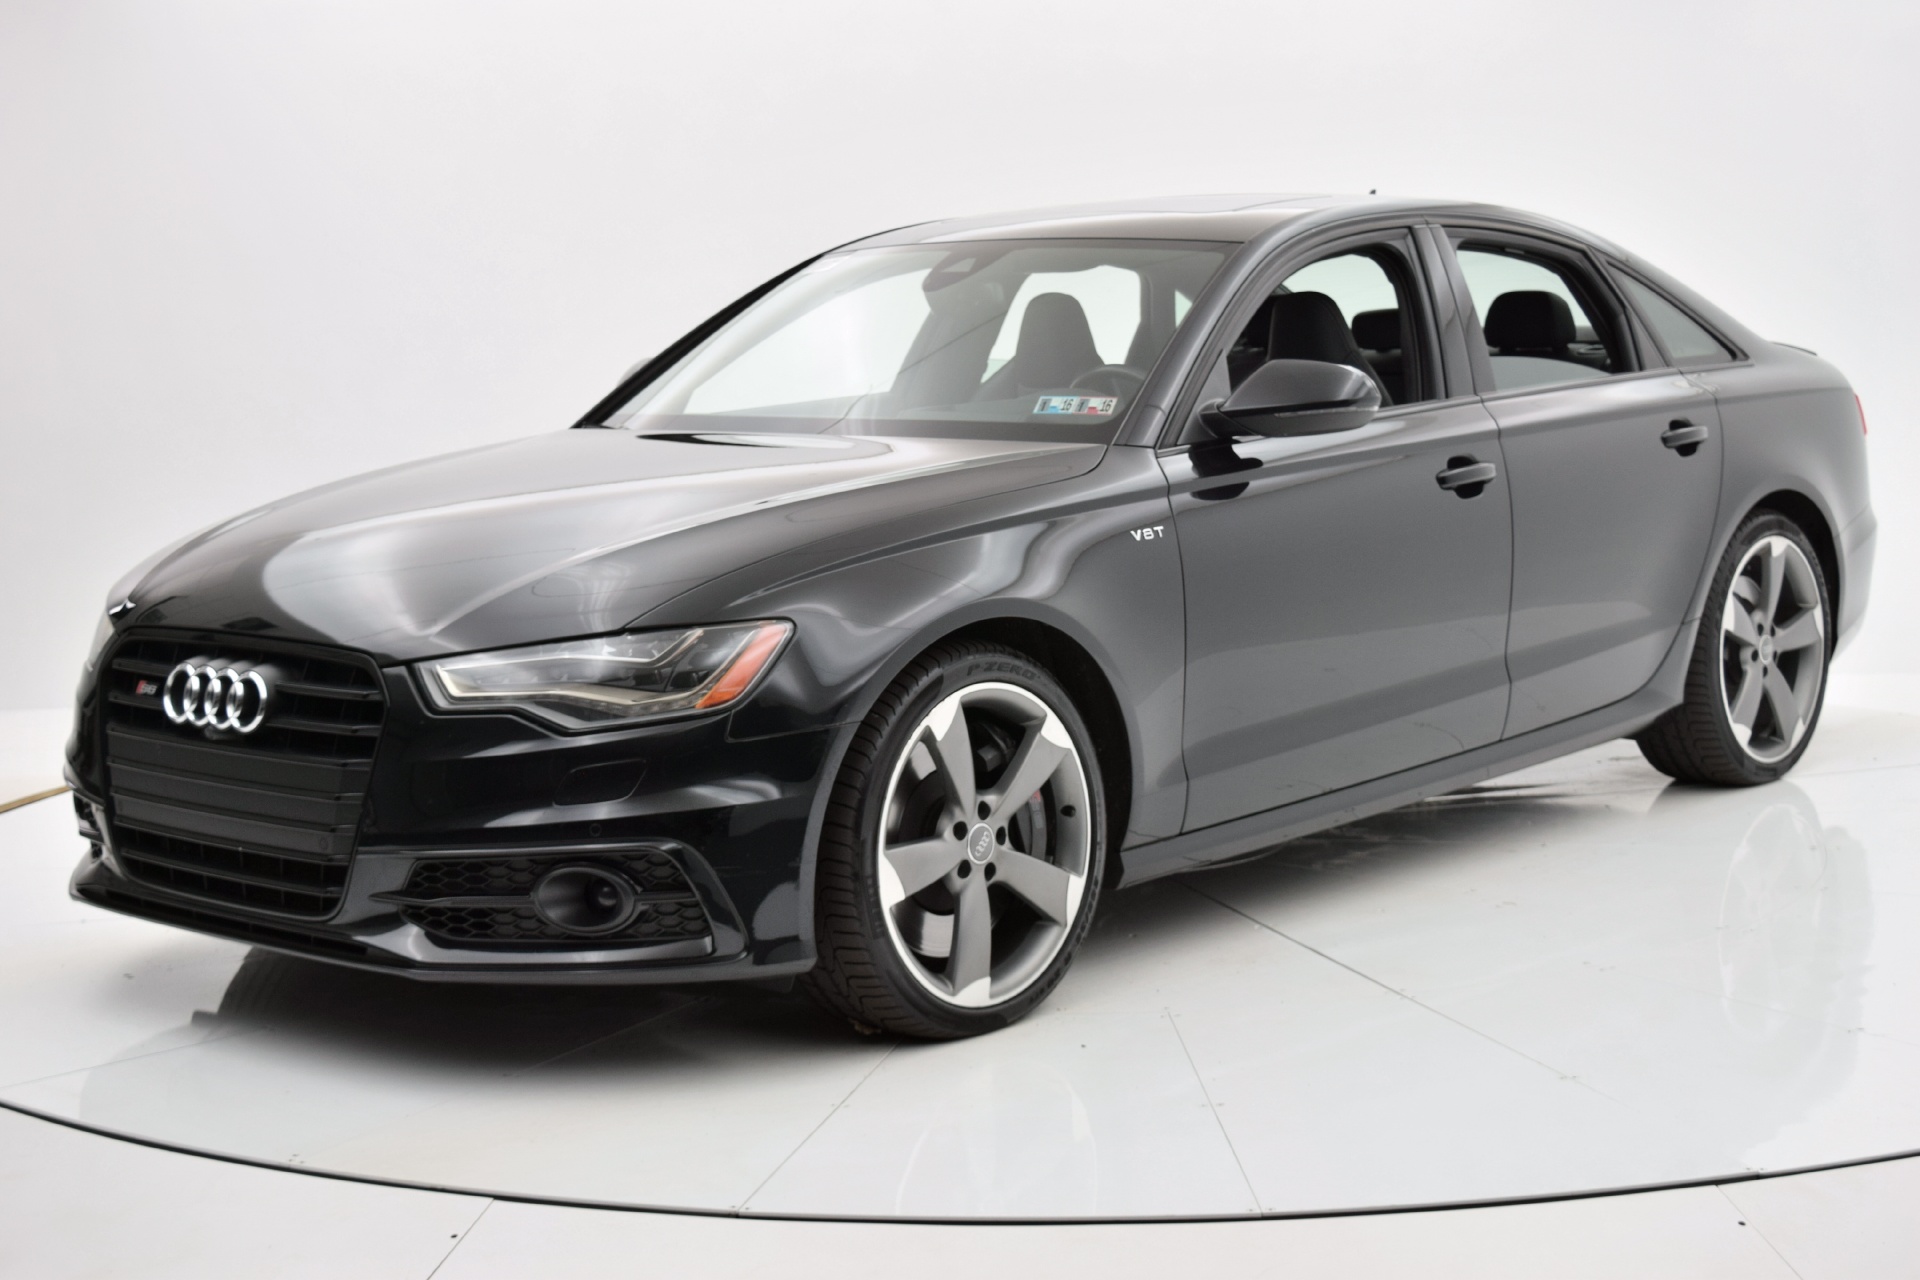 Used 2014 Audi S6 Quattro S tronic For Sale 61 880 F C Kerbeck 